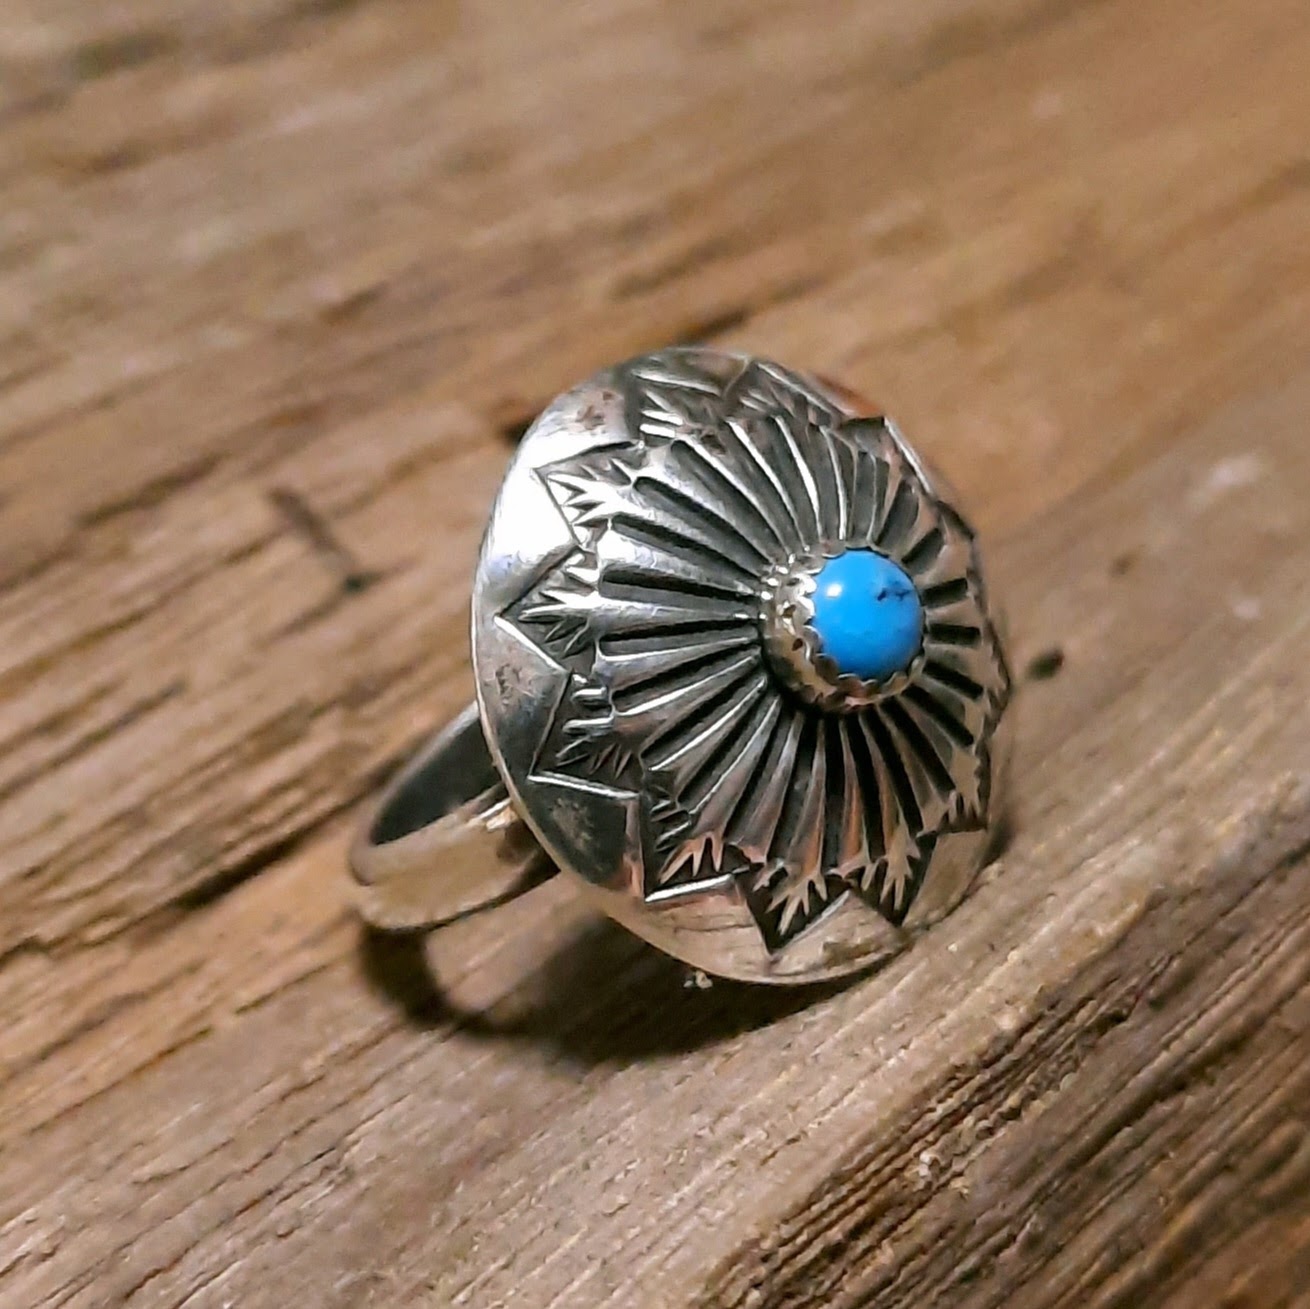 Vintage Style Concho Ring